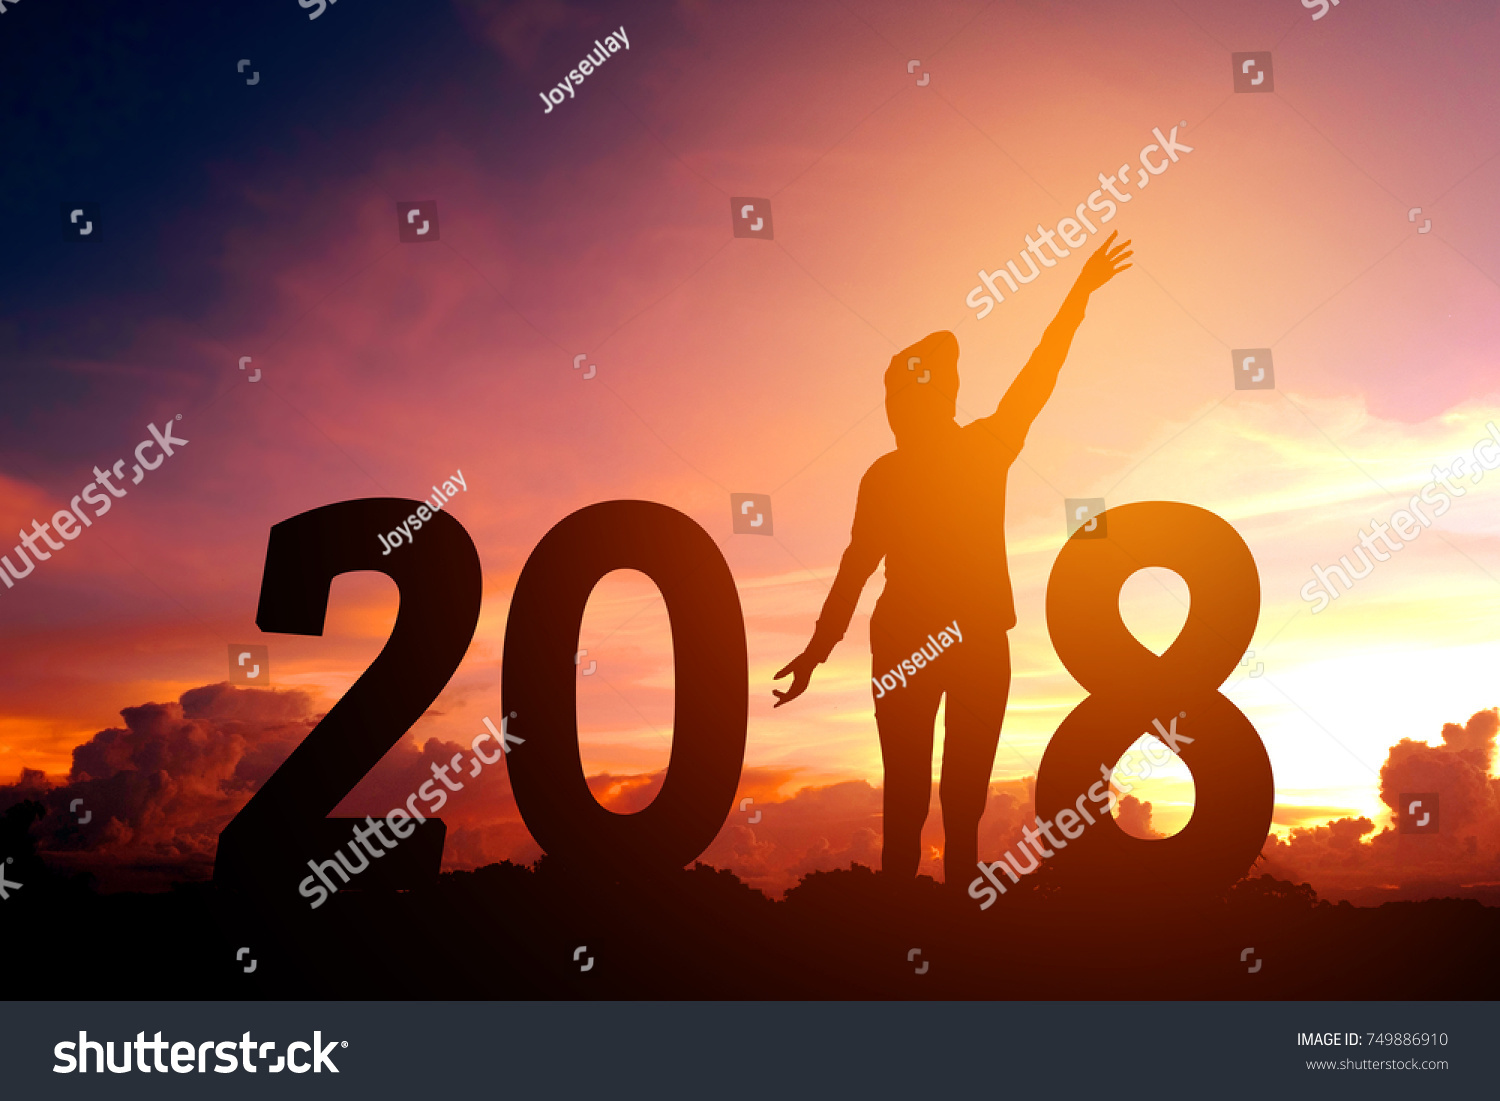 Silhouette young man Happy for 2018 new year #749886910